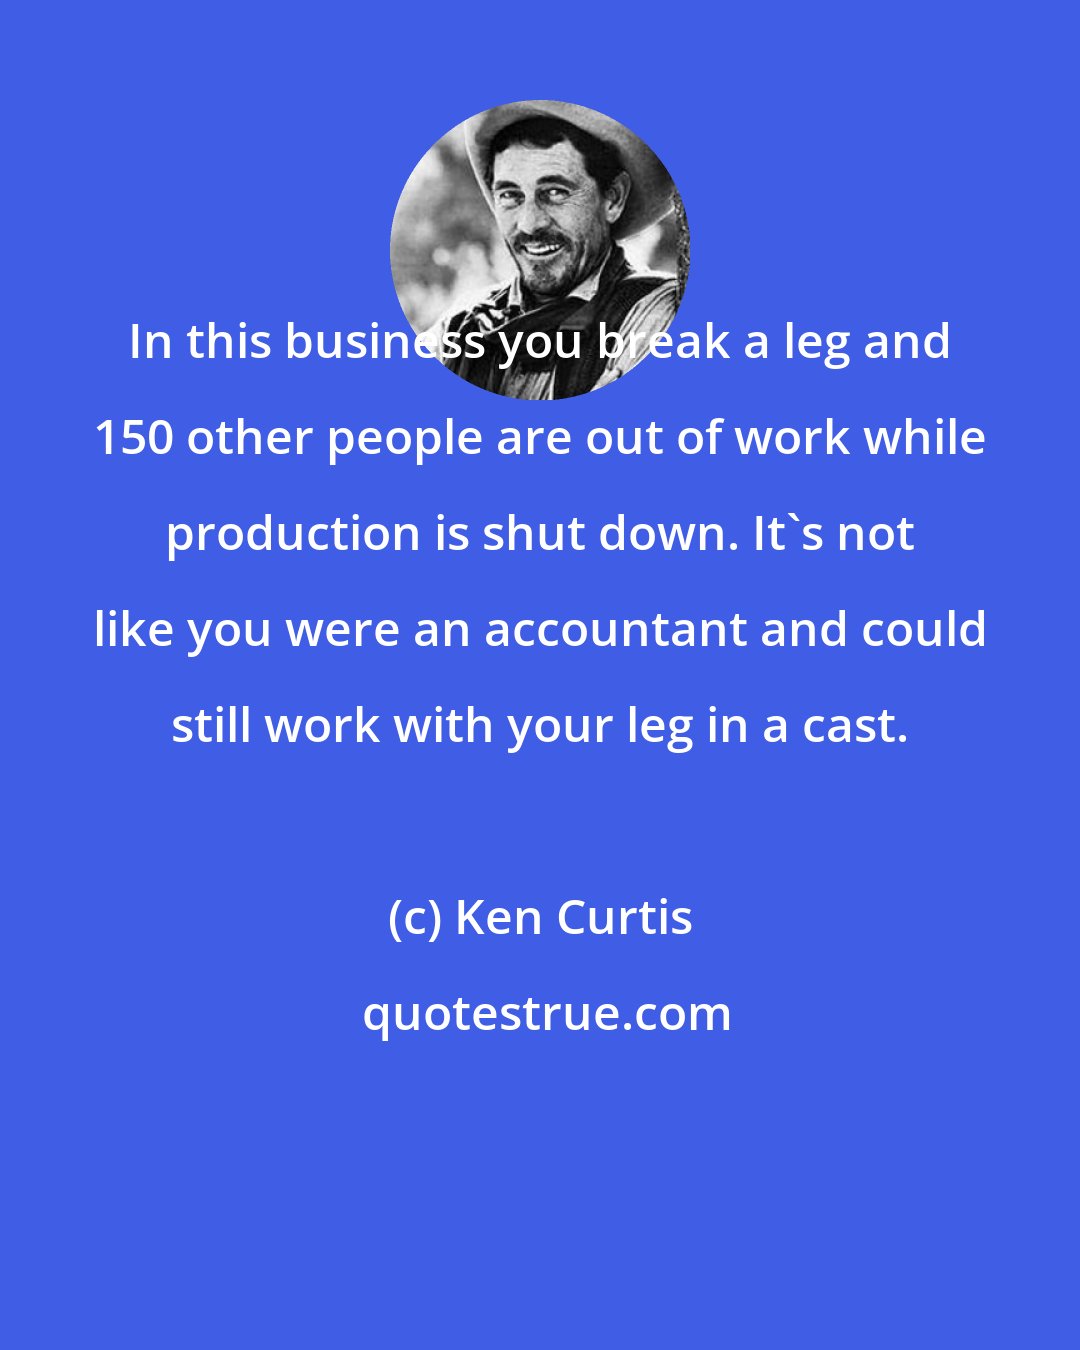 Ken Curtis: In this business you break a leg and 150 other people are out of work while production is shut down. It's not like you were an accountant and could still work with your leg in a cast.